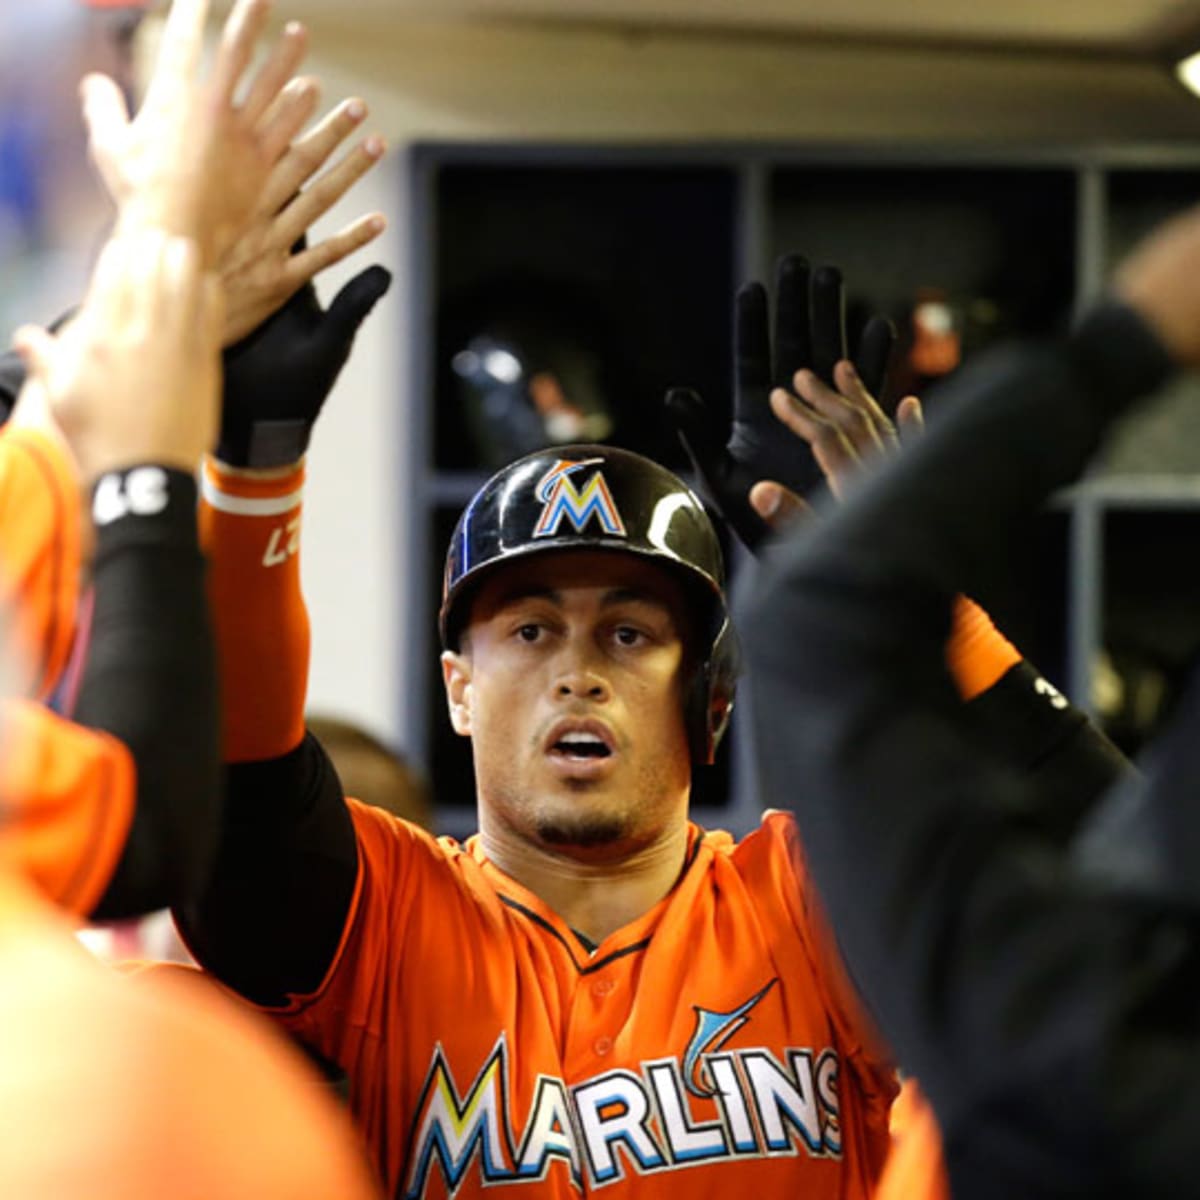 Marlins to sign Giancarlo Stanton to 13-year, $325 million deal - Sports  Illustrated